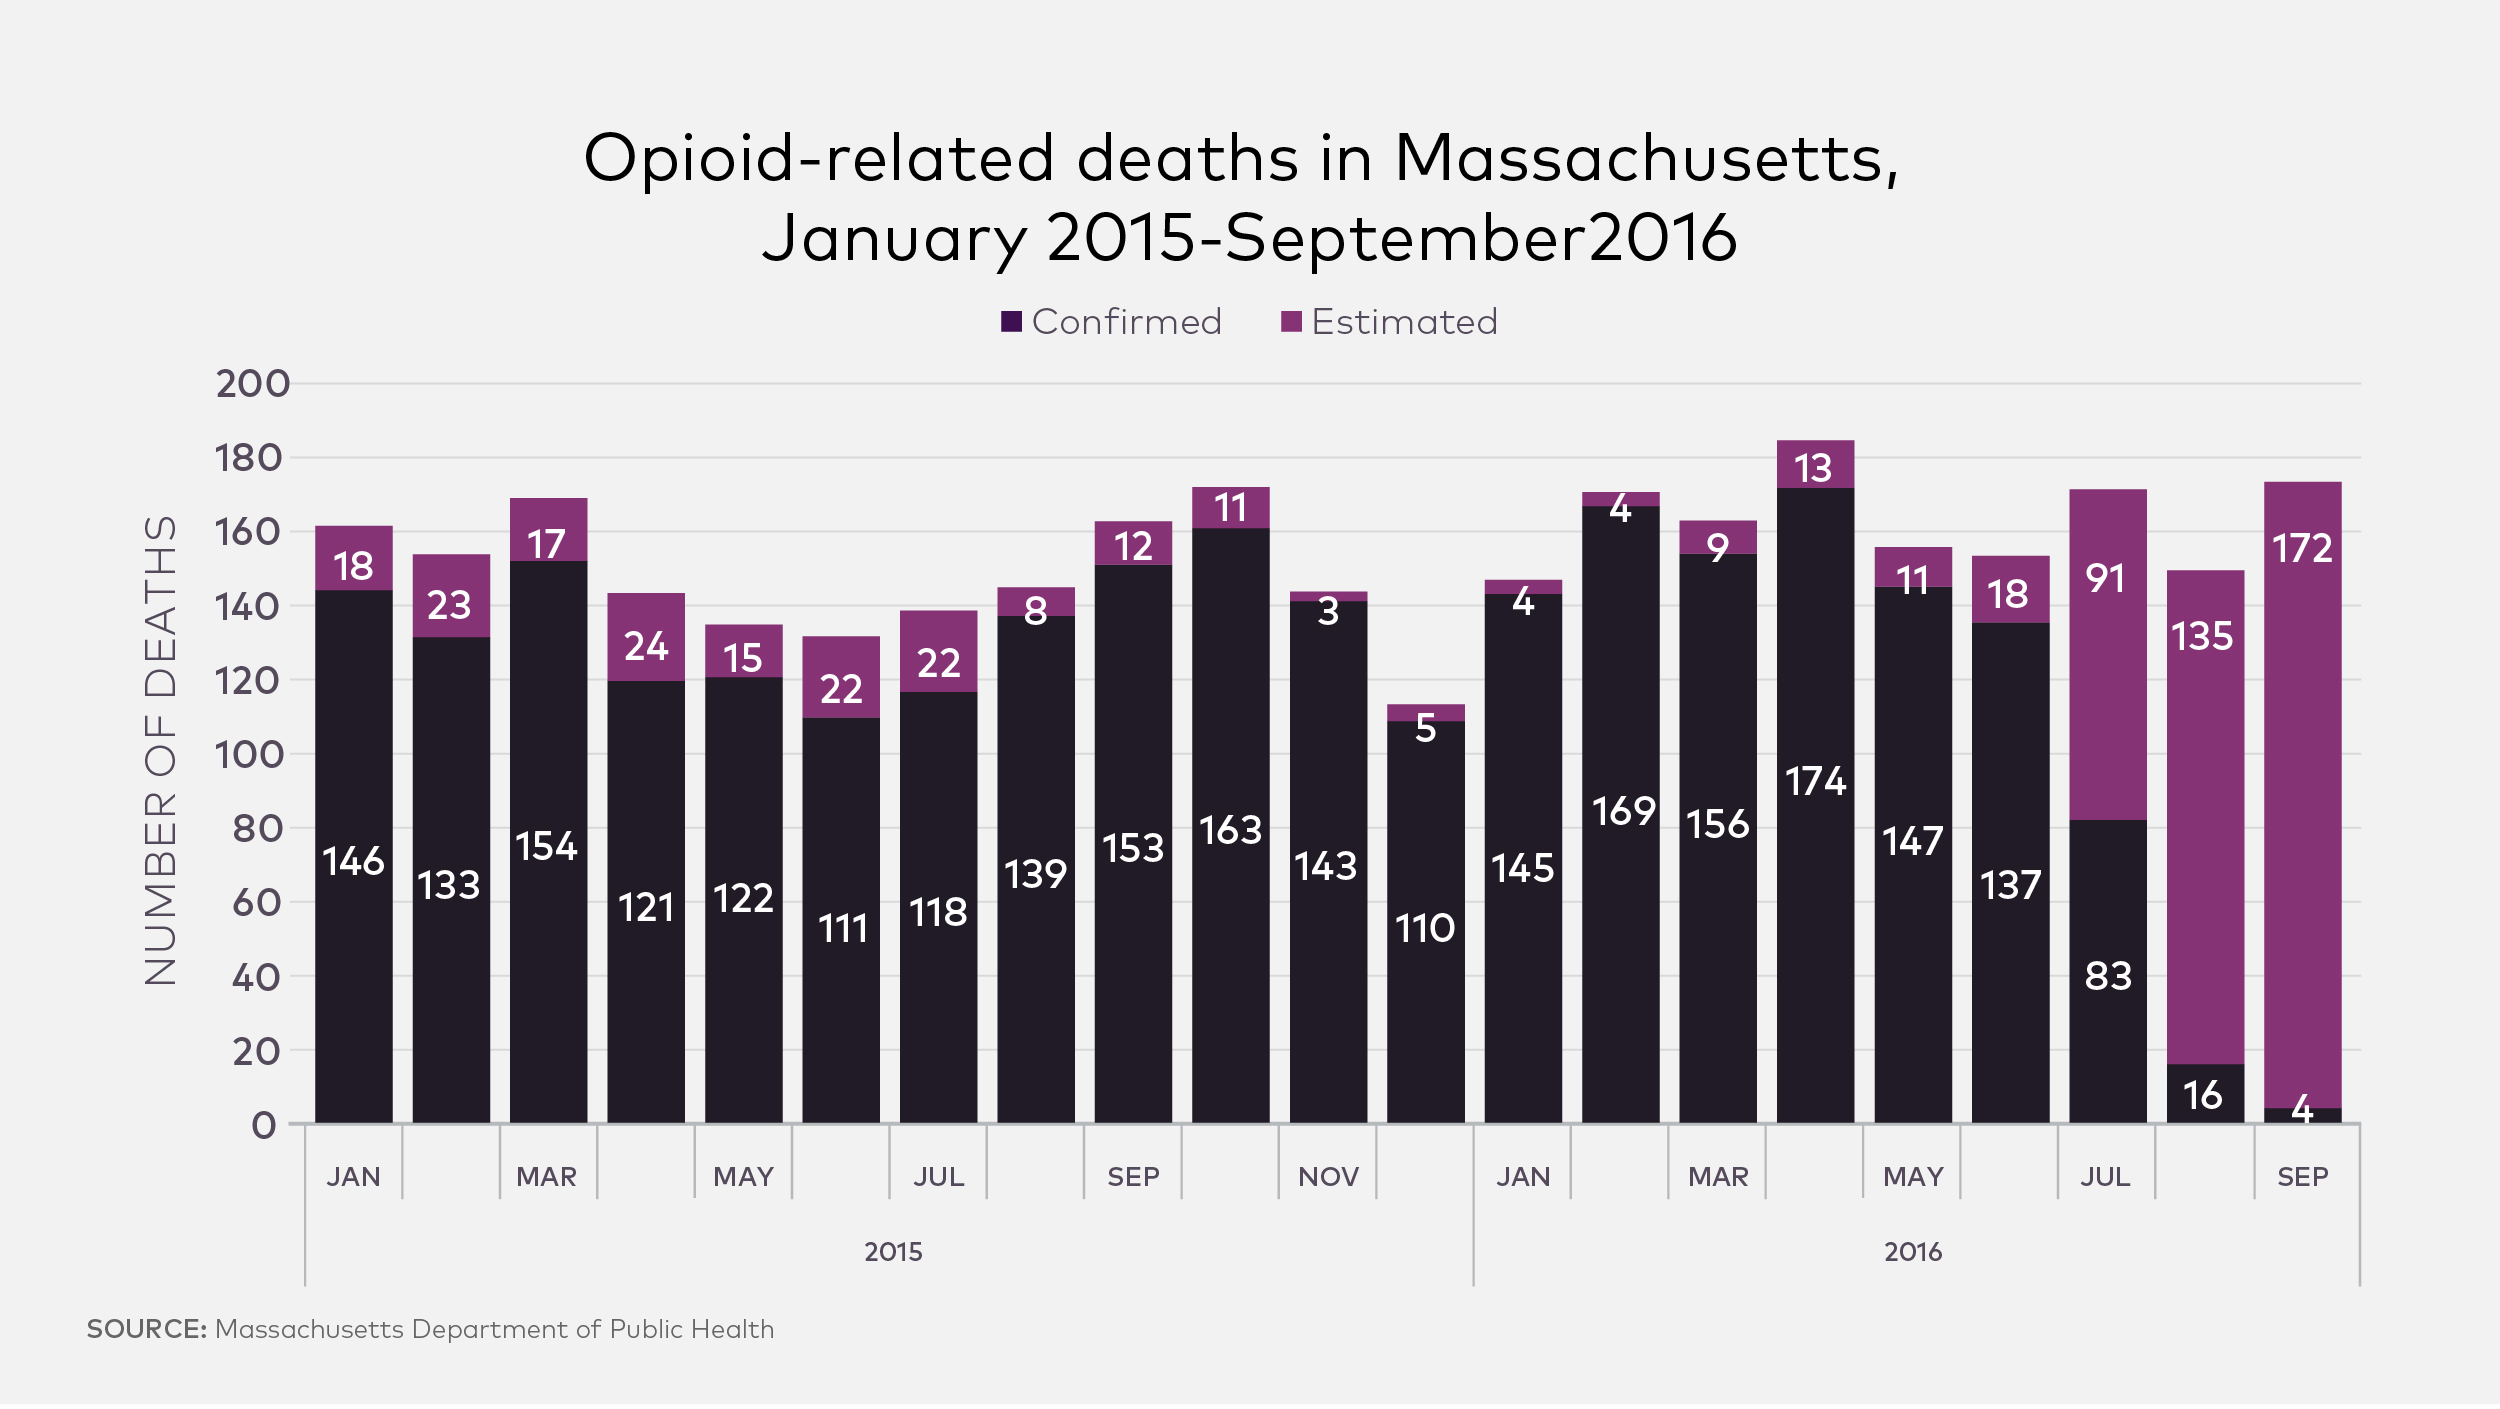 bar graph showing opioid-related deaths in Massachusetts, Jan 2015-Sept 2016